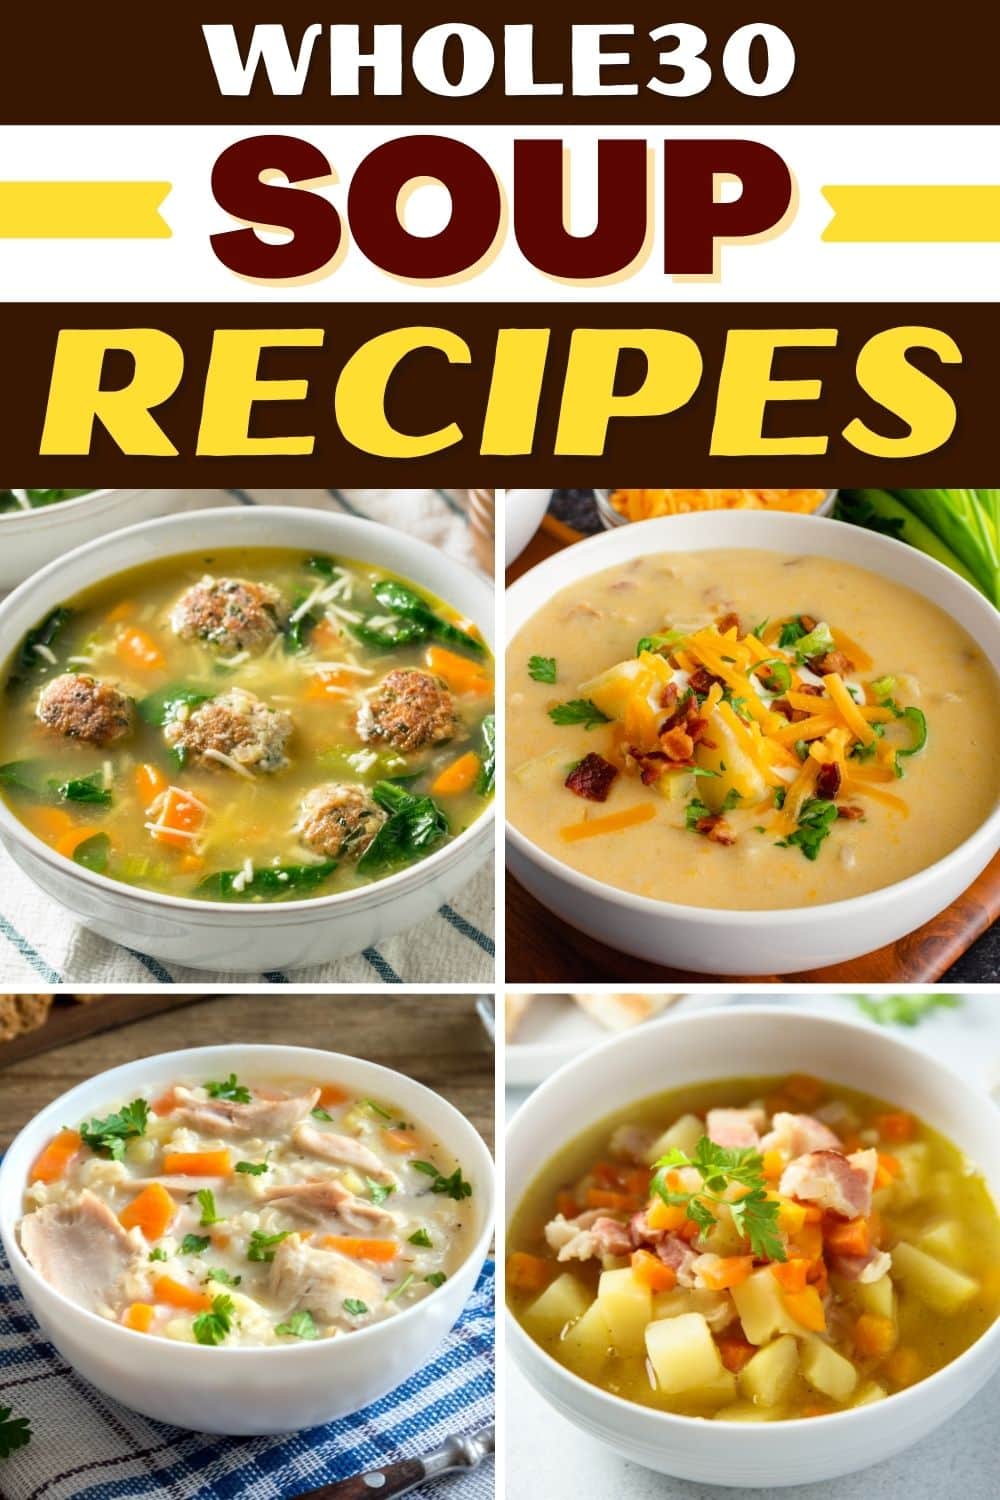 25 Best Whole30 Soup Recipes - Insanely Good